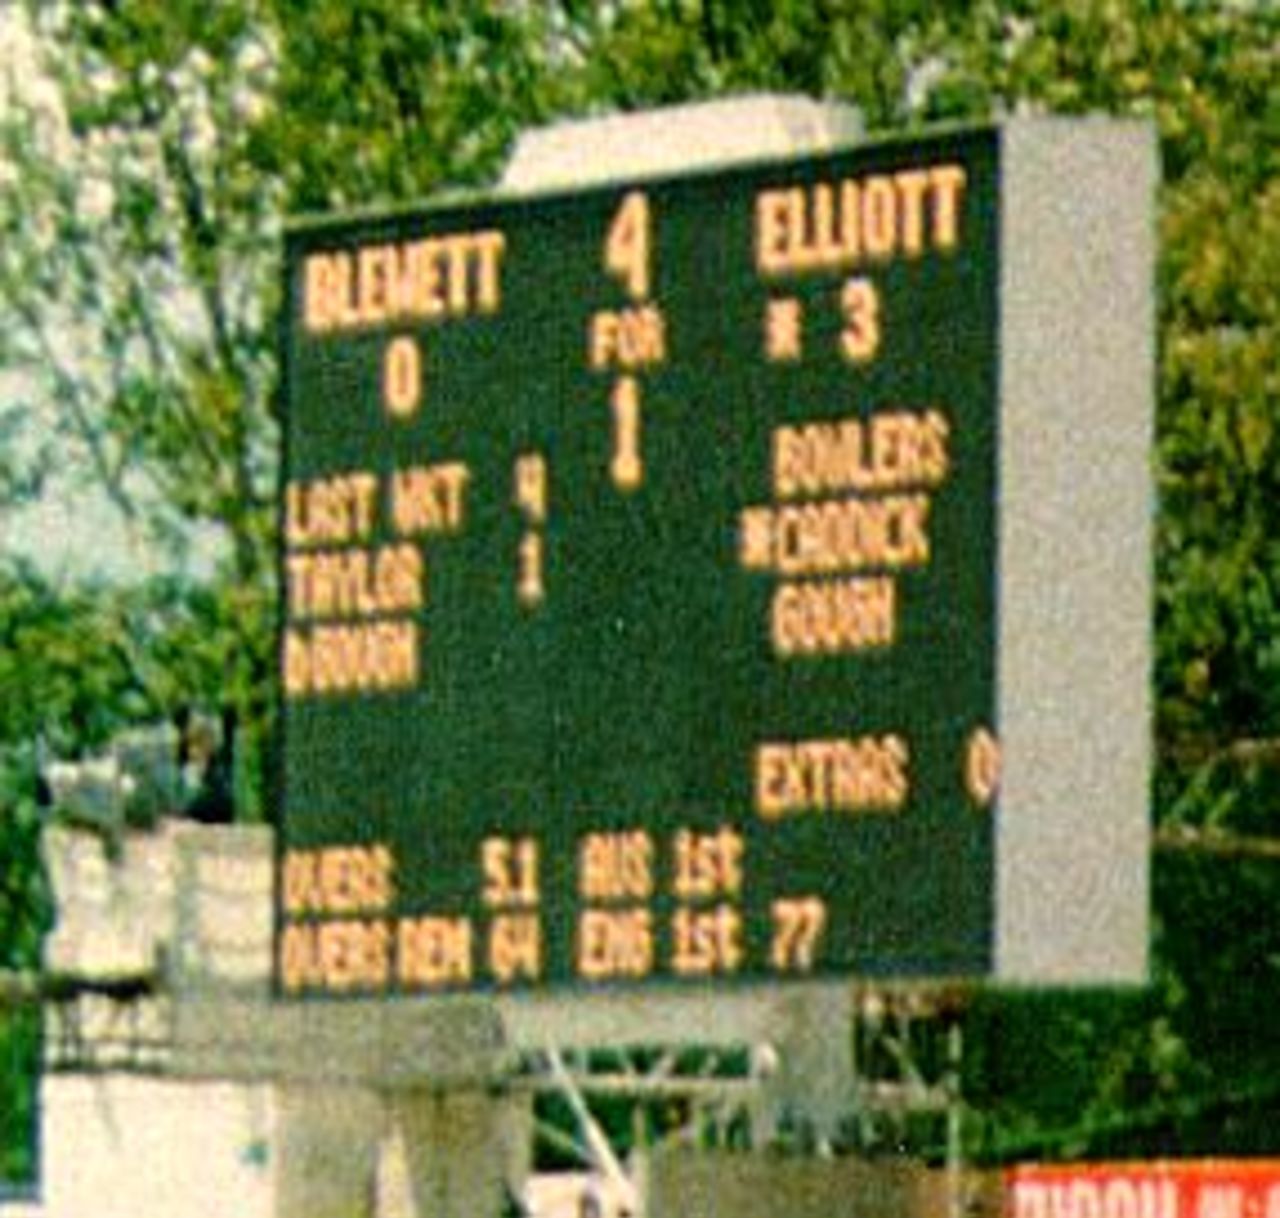 Scoreboard at Lord's during the 2nd Test v Australia. England 77ao, Australia 4/1.